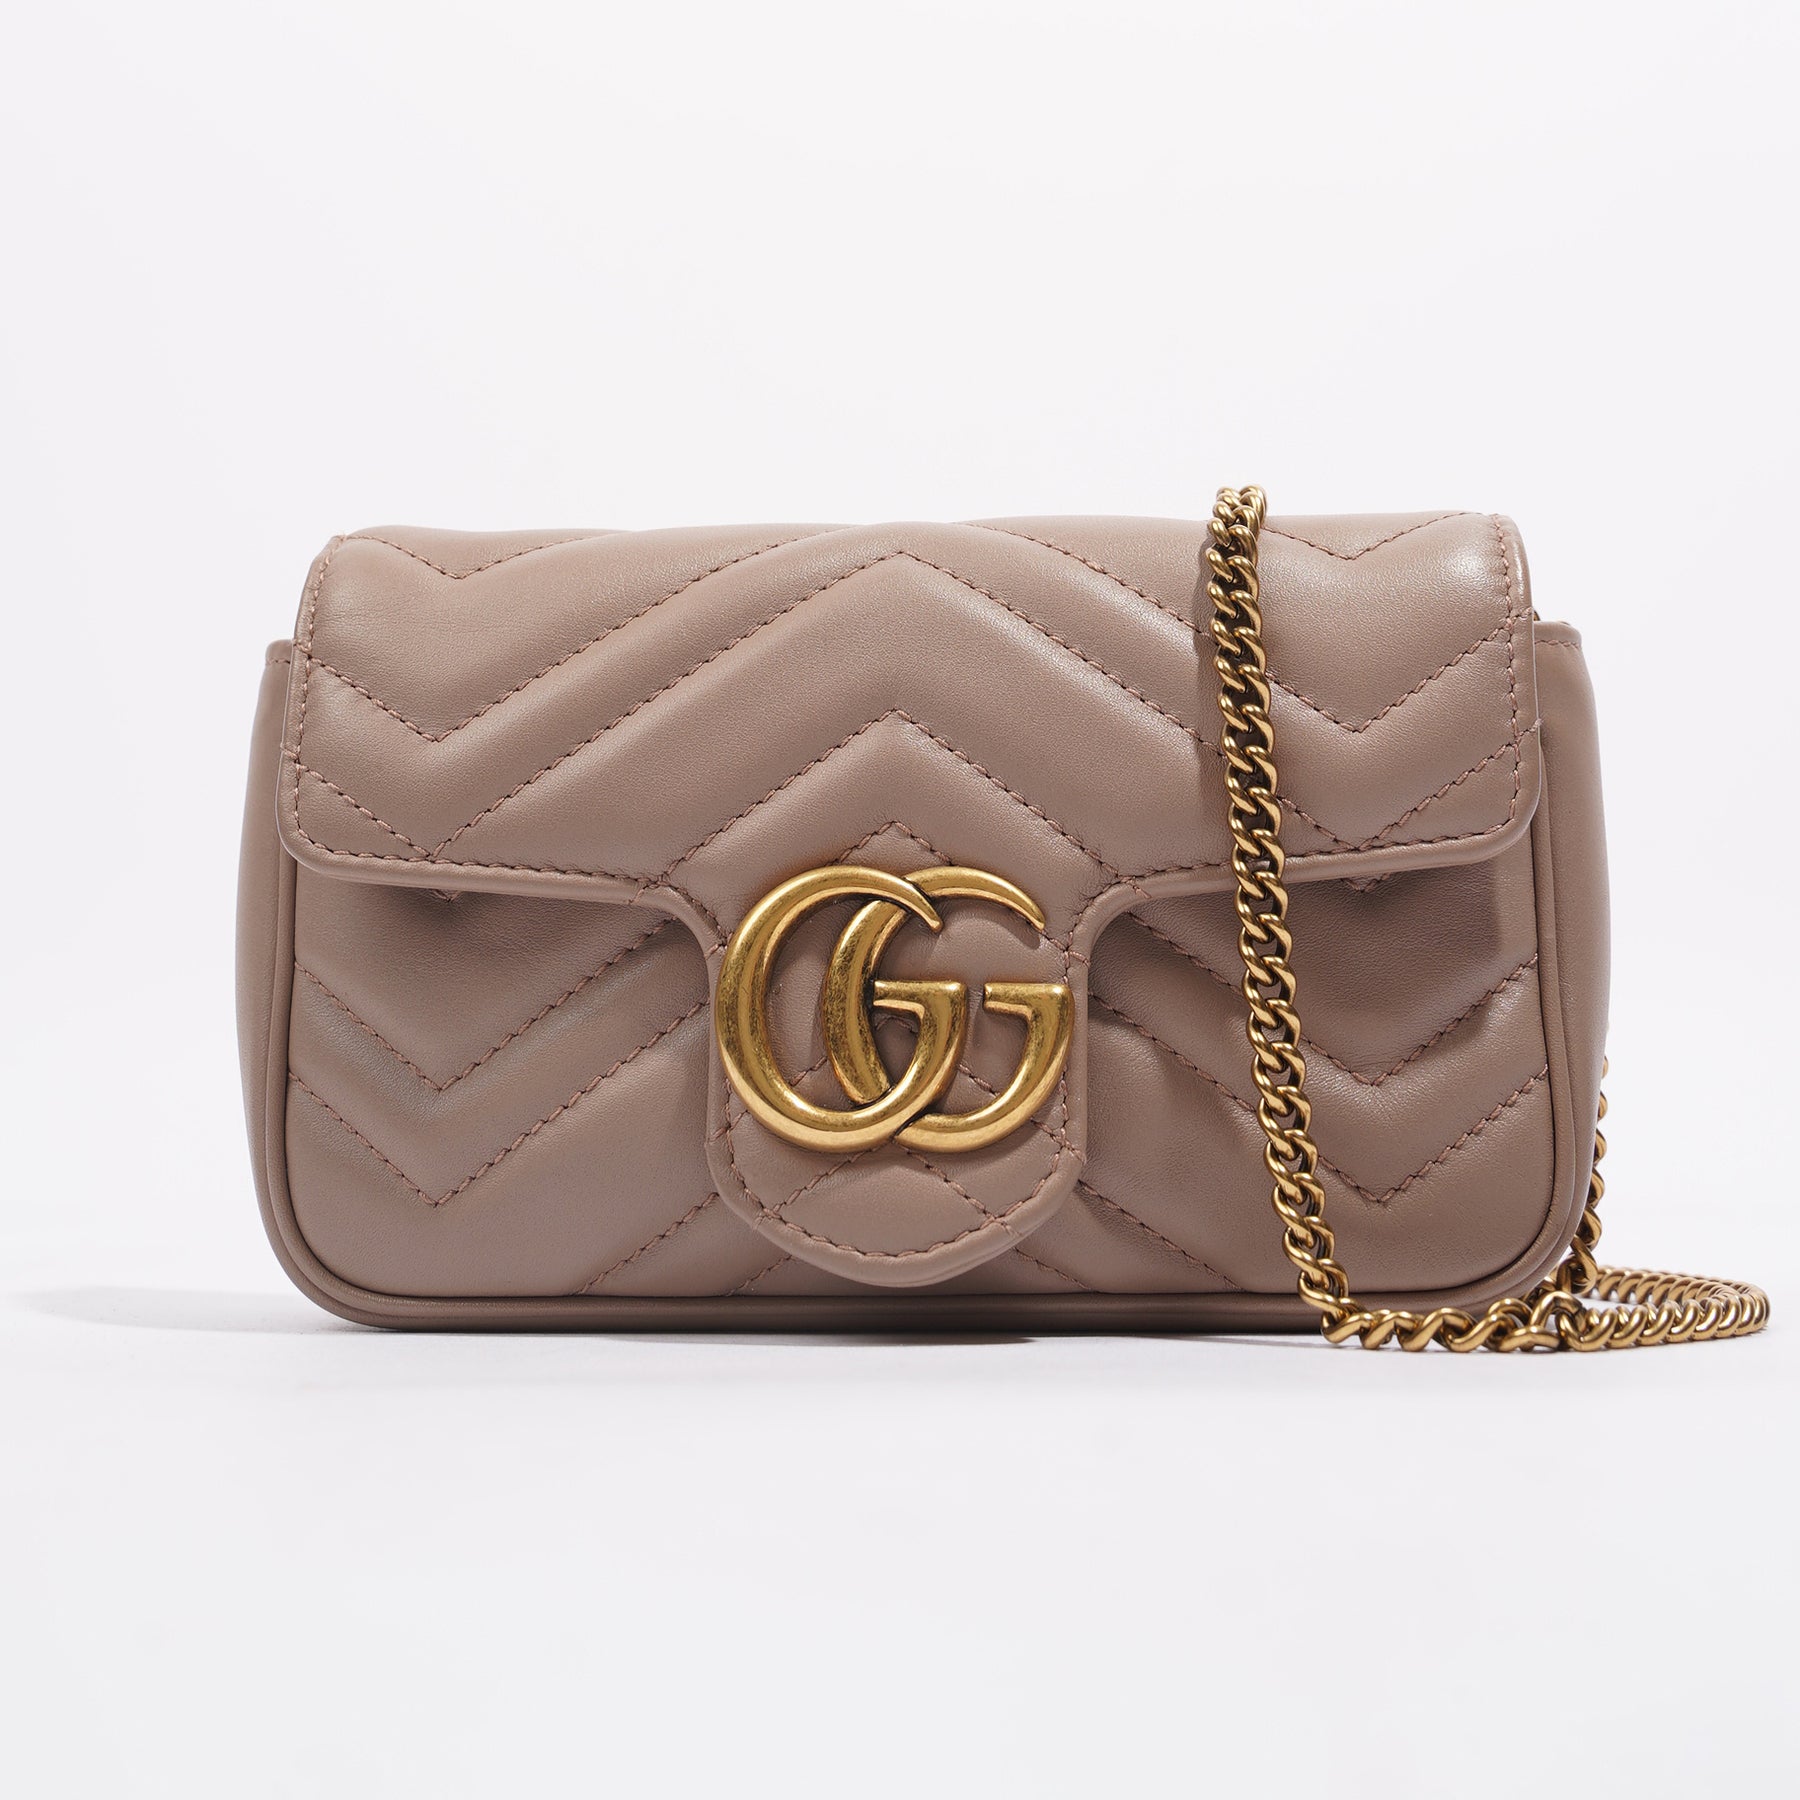 Gucci GG Marmont Leather Super Mini Bag | Mystic White | Os | The Webster